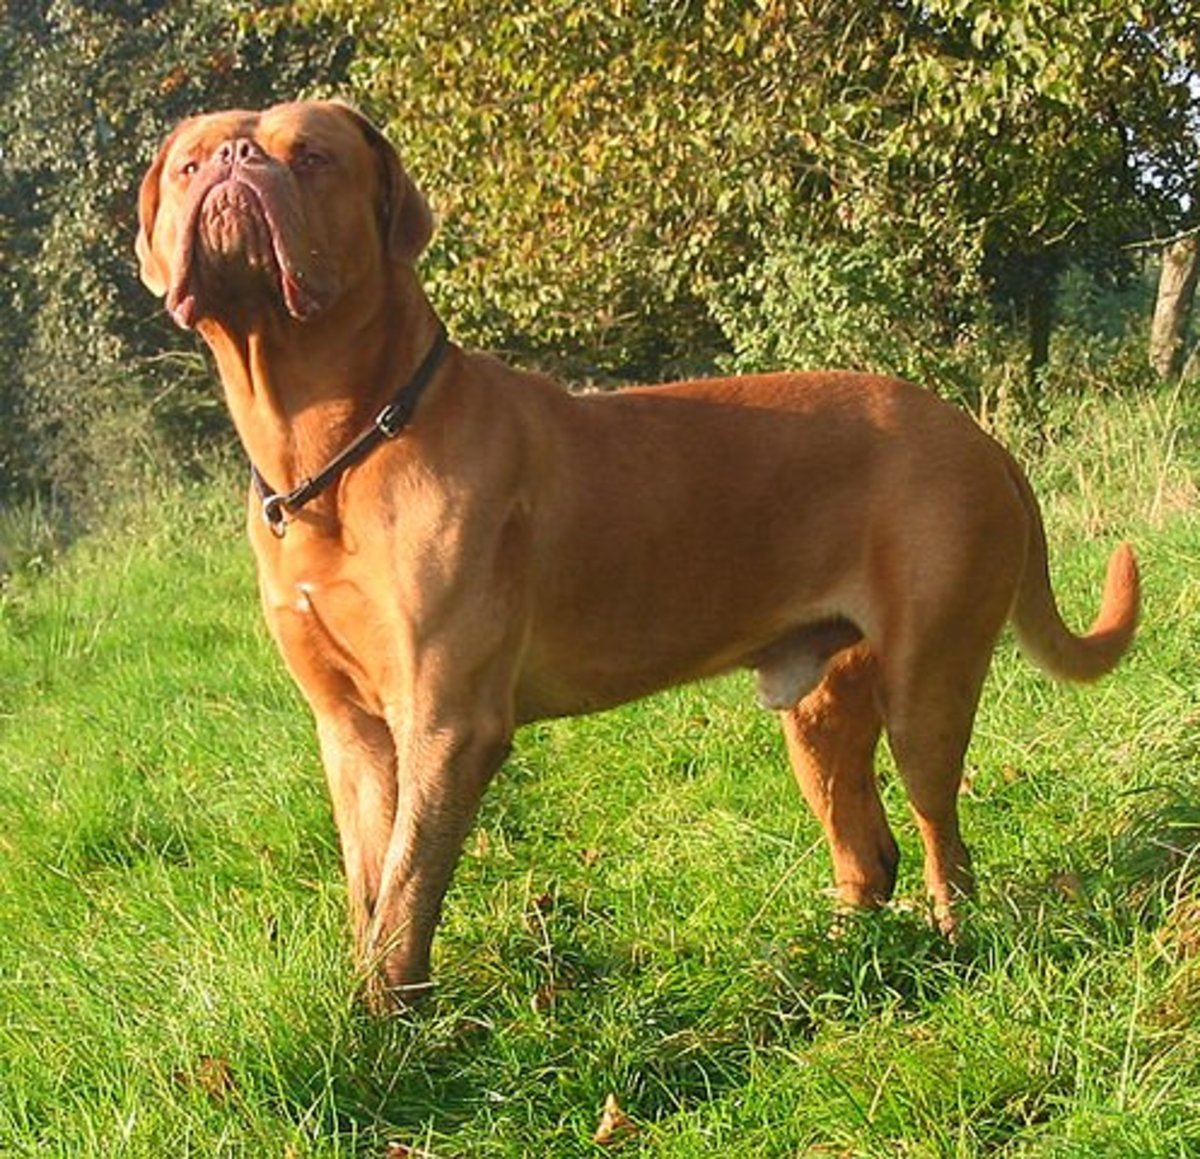 Looking at the majestic stance and the massive, powerful appearance of the Dogue, it is easy to see why the breed was a popular guard and hunting dog. 